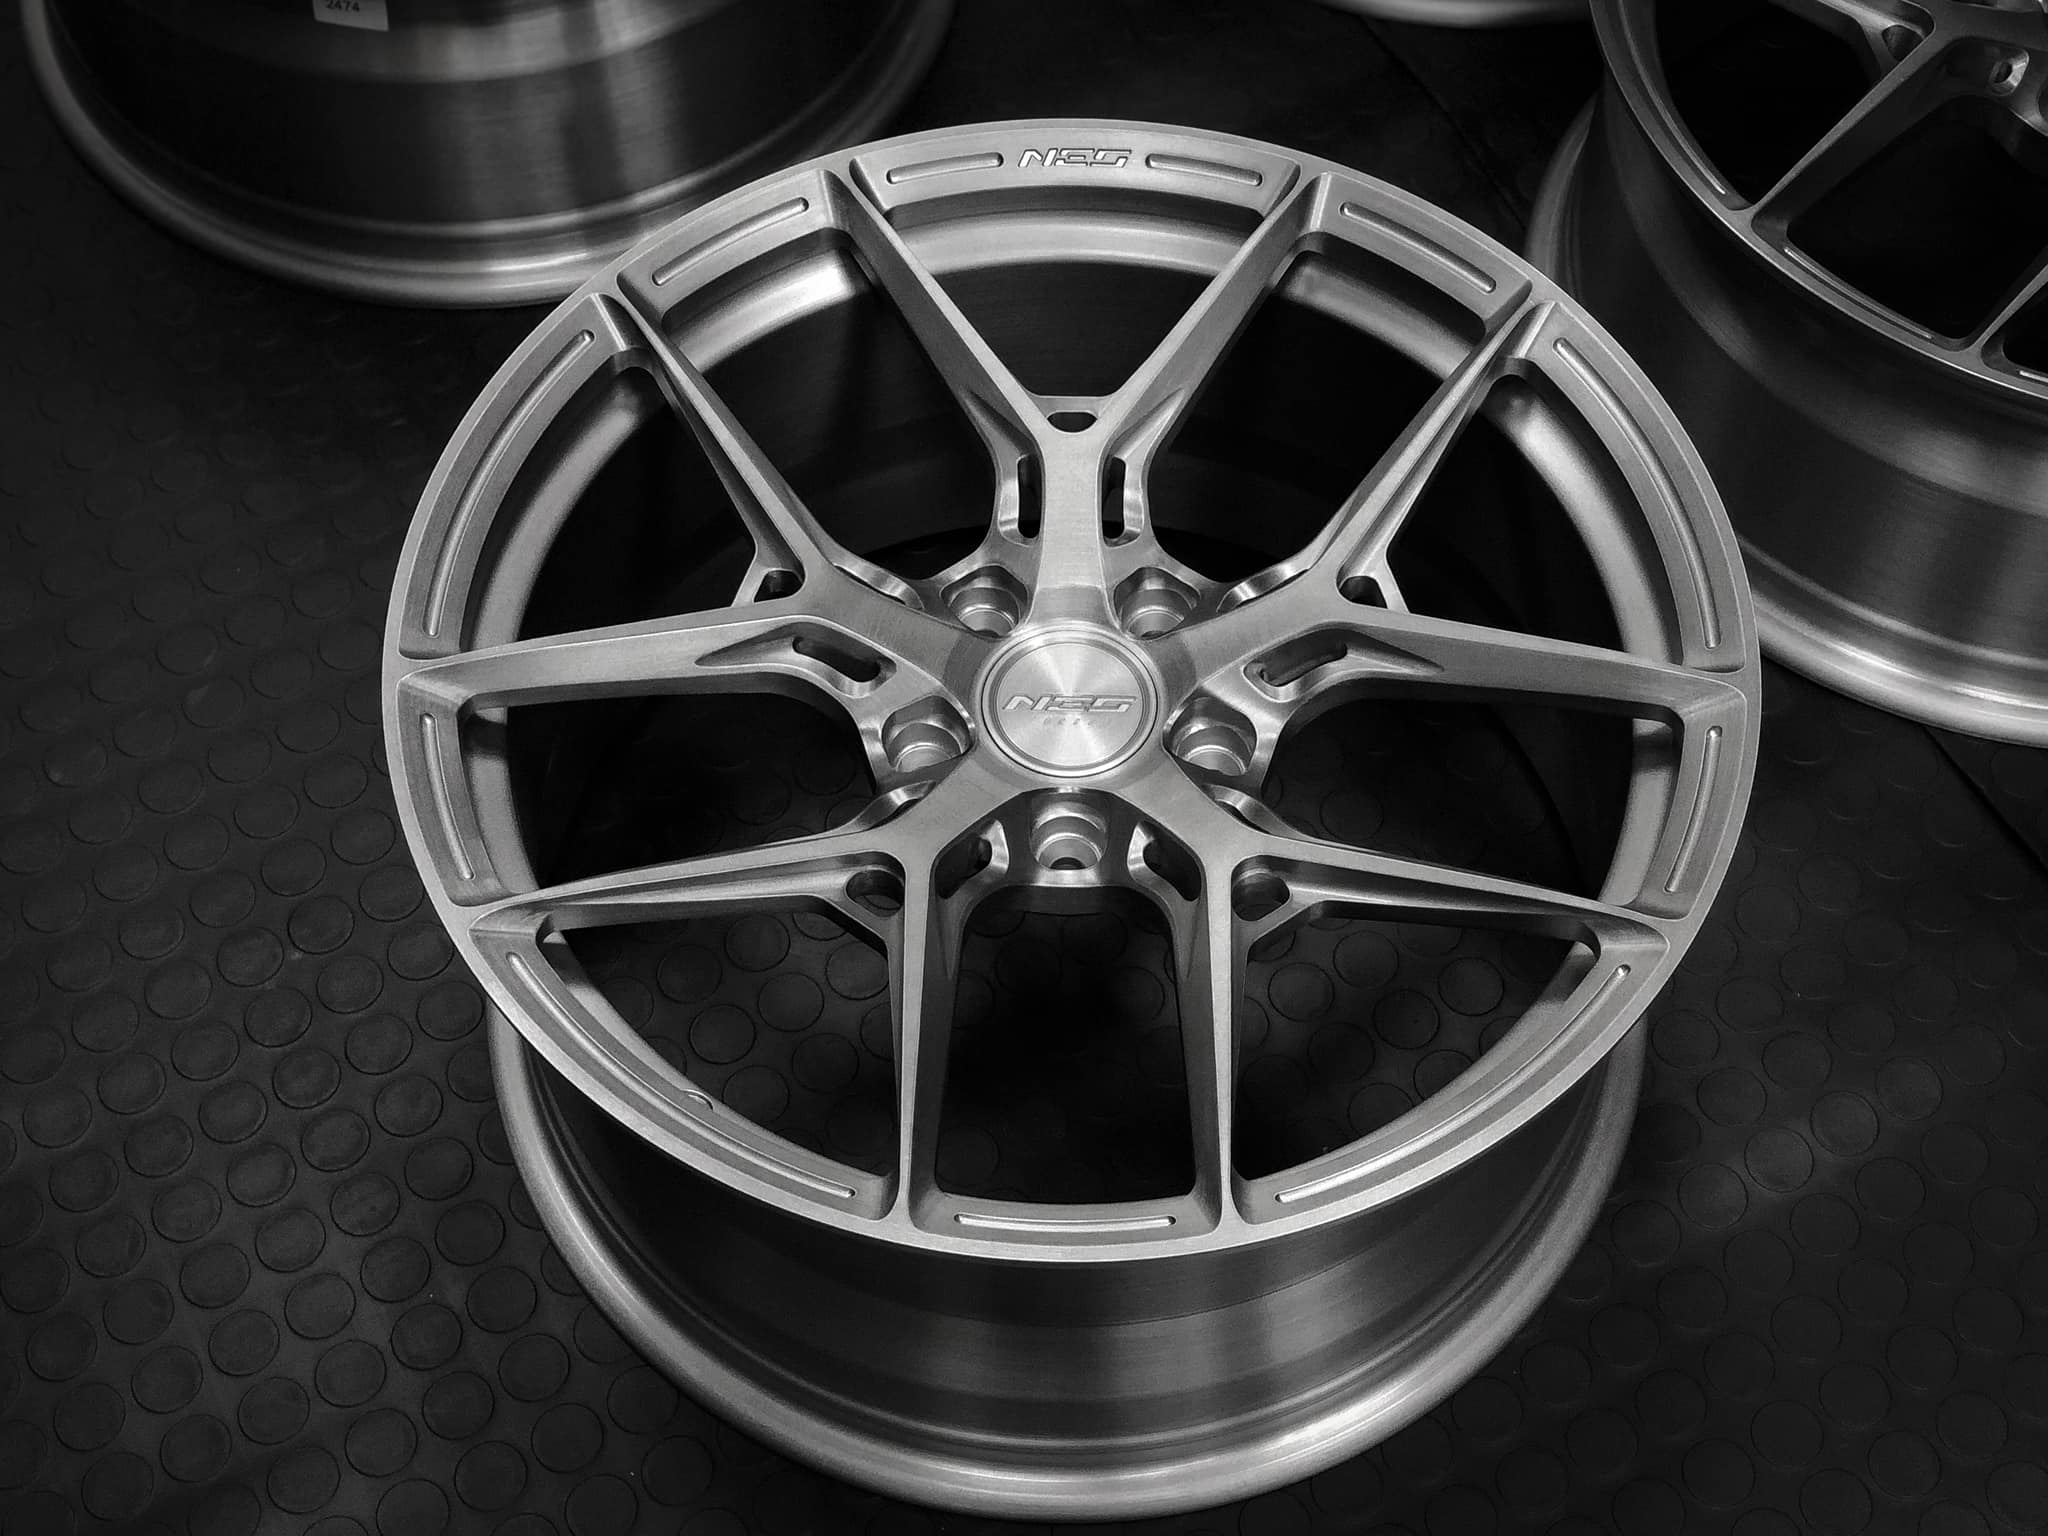 S650 Mustang New** NES Forged Wheels by MRR Design 1pc and 2pc 50929552_2275829756007721_5618421838599159808_o